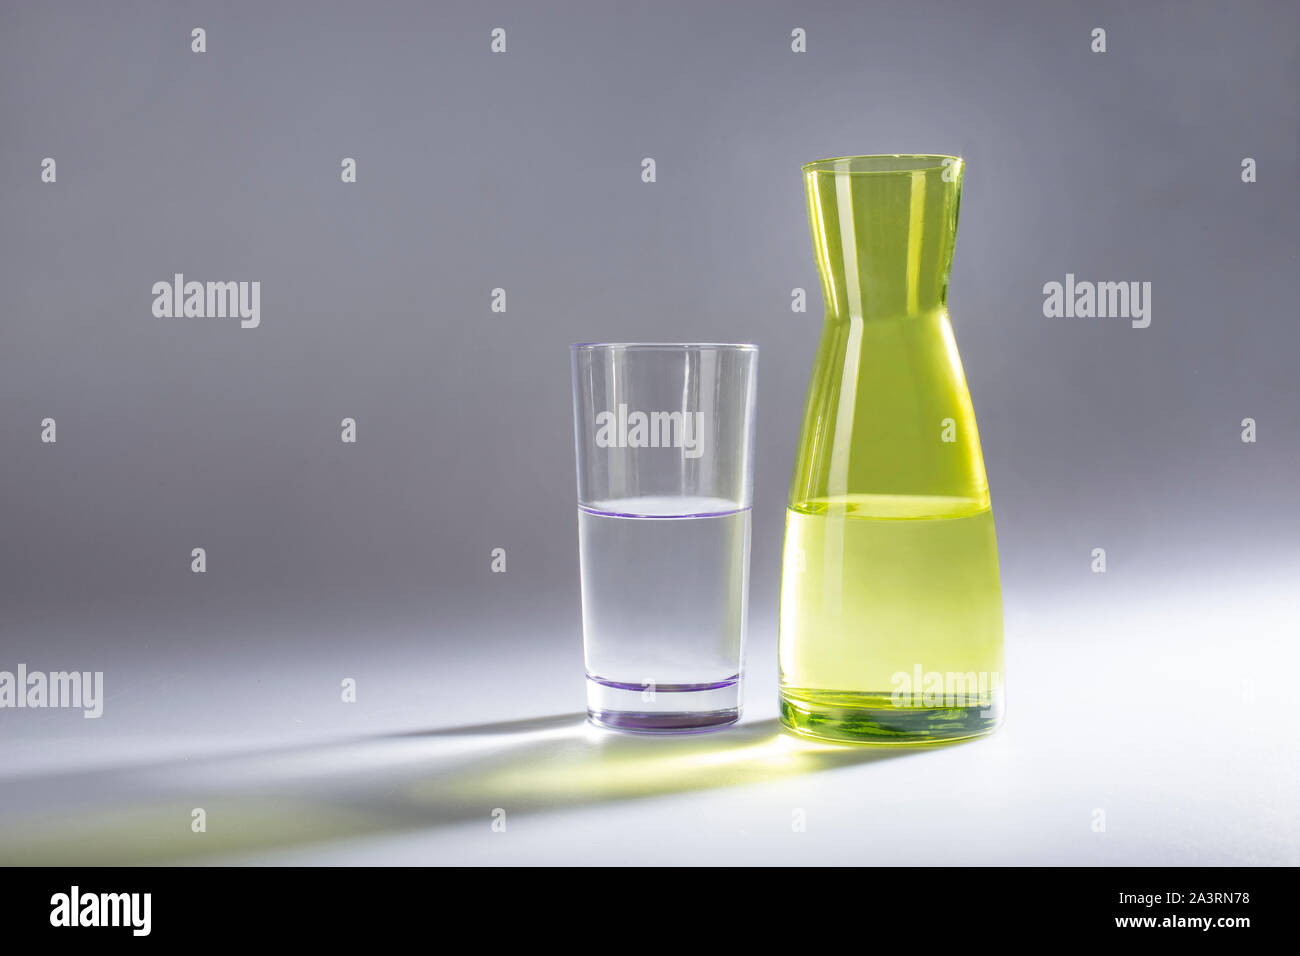 Studio picture of water glass with clipping path Stock Photo